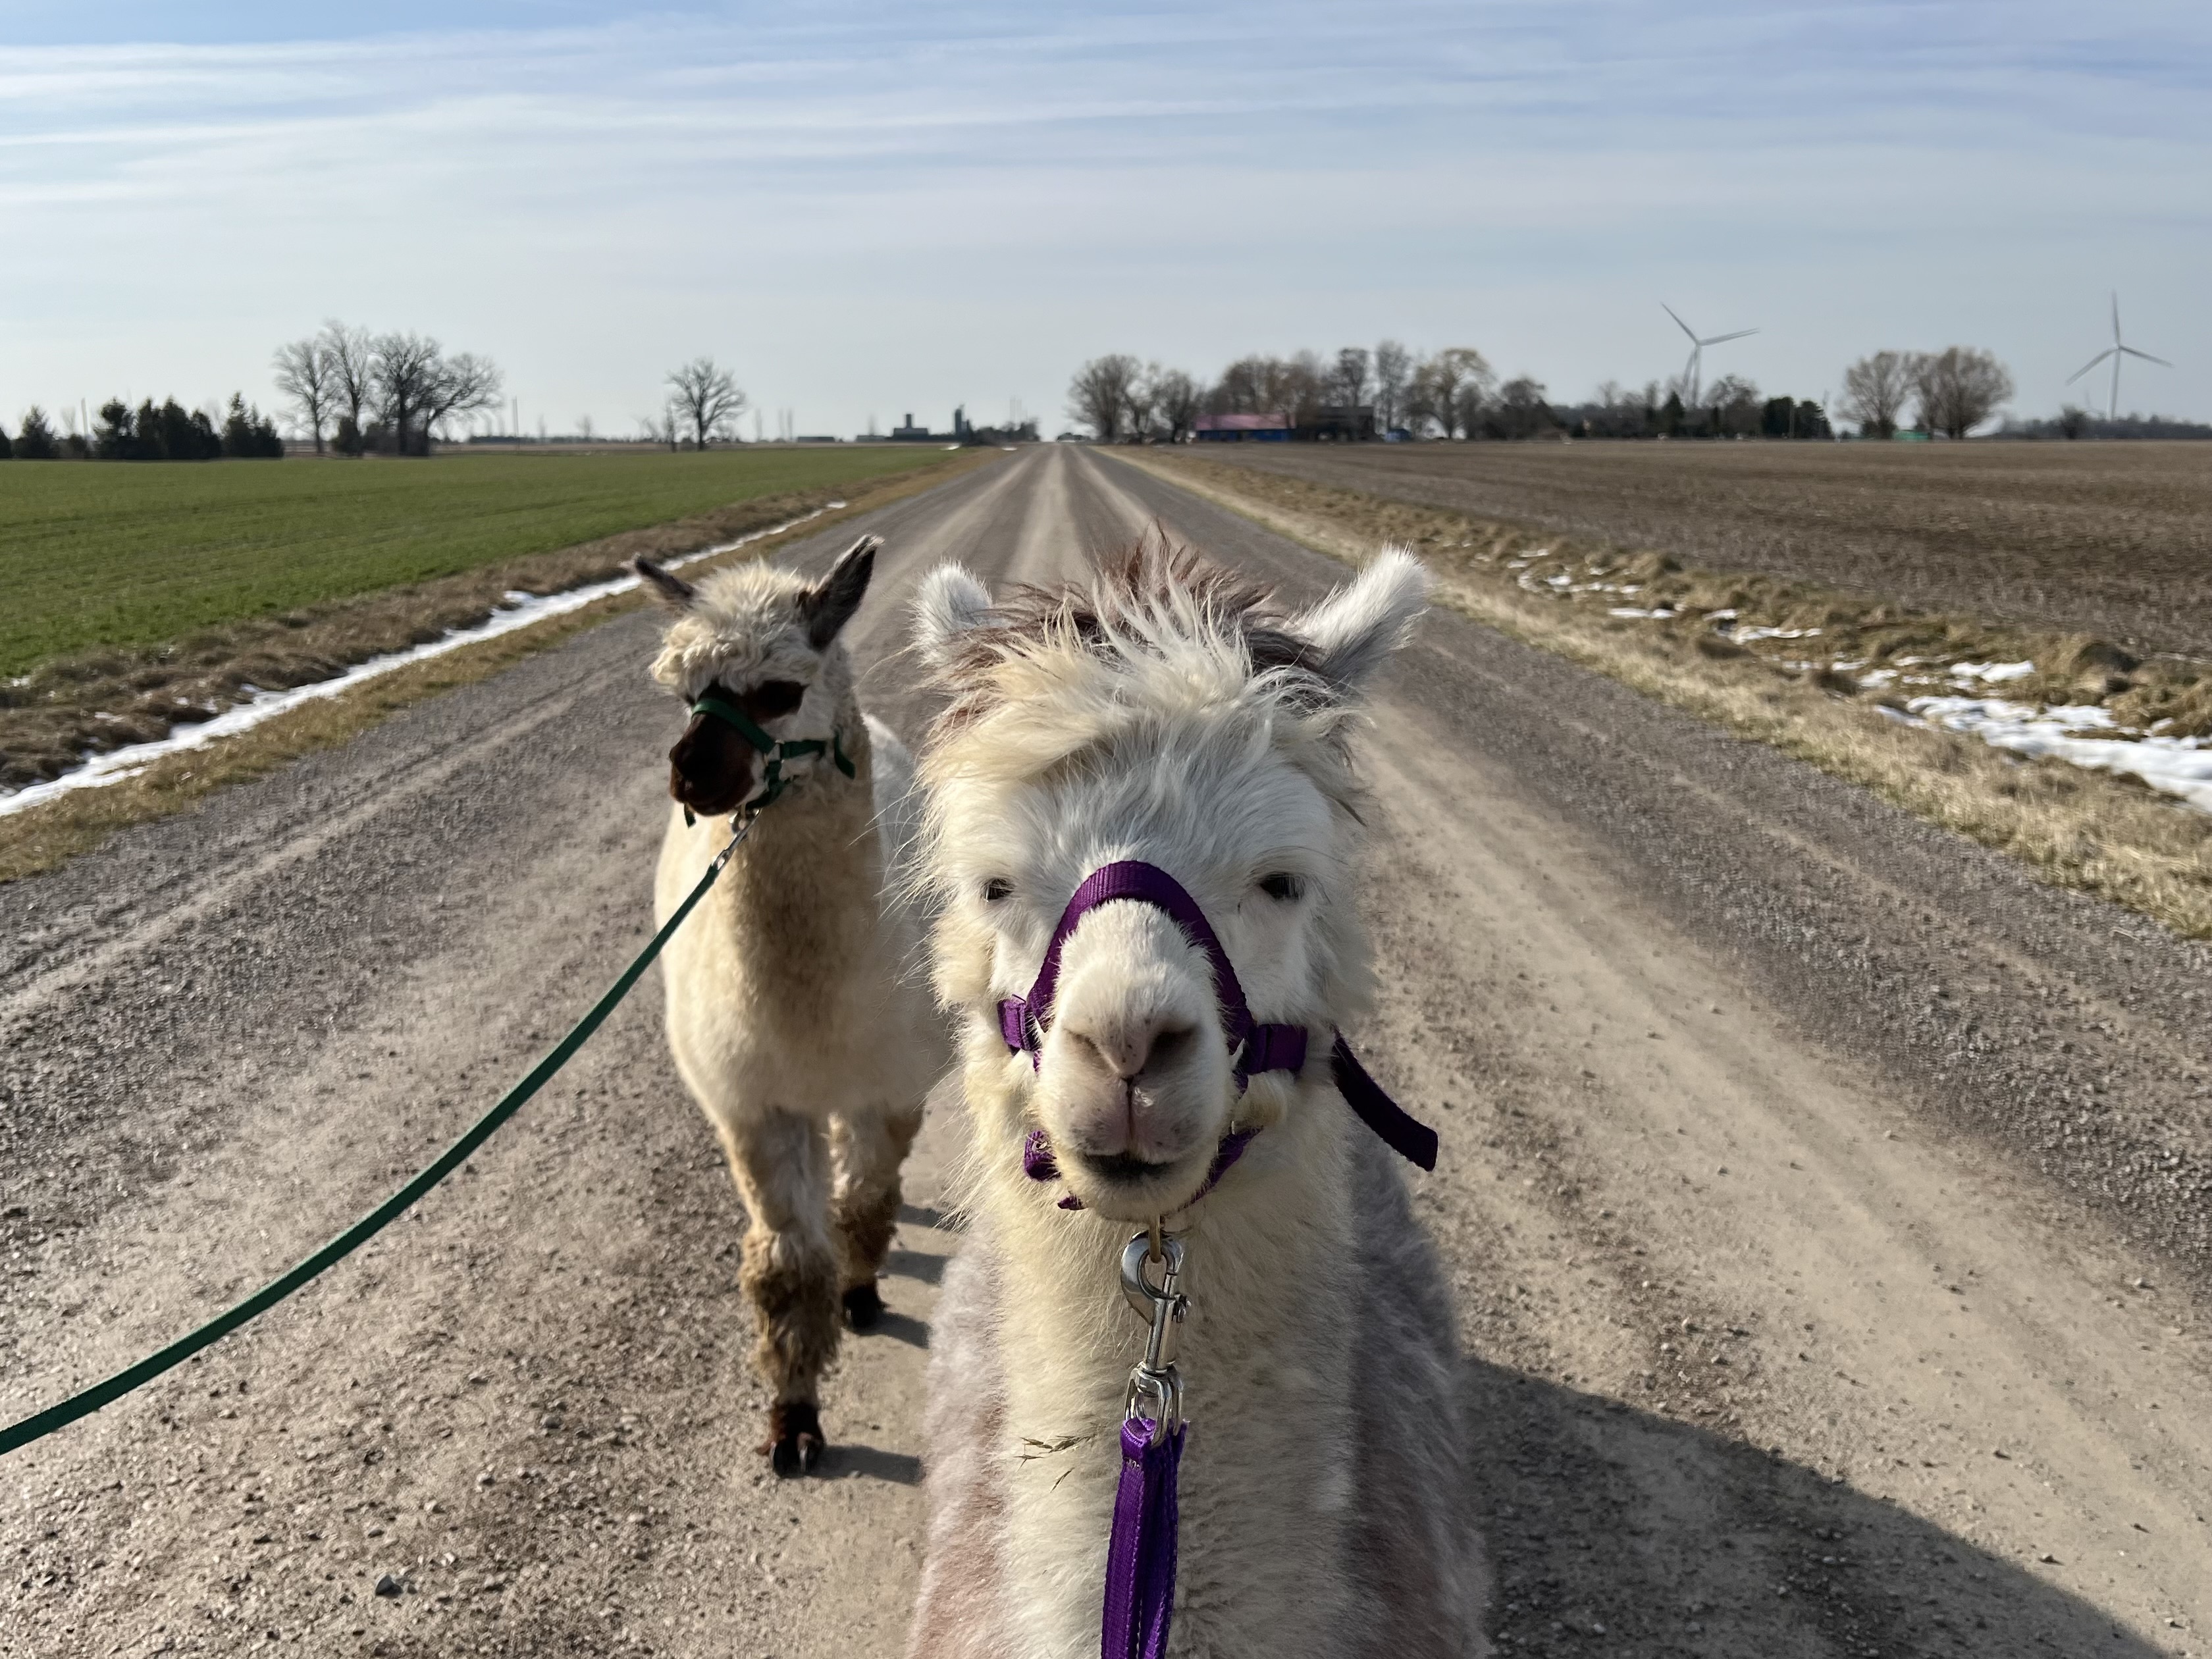 Two alpacas walking on a country road with leashes